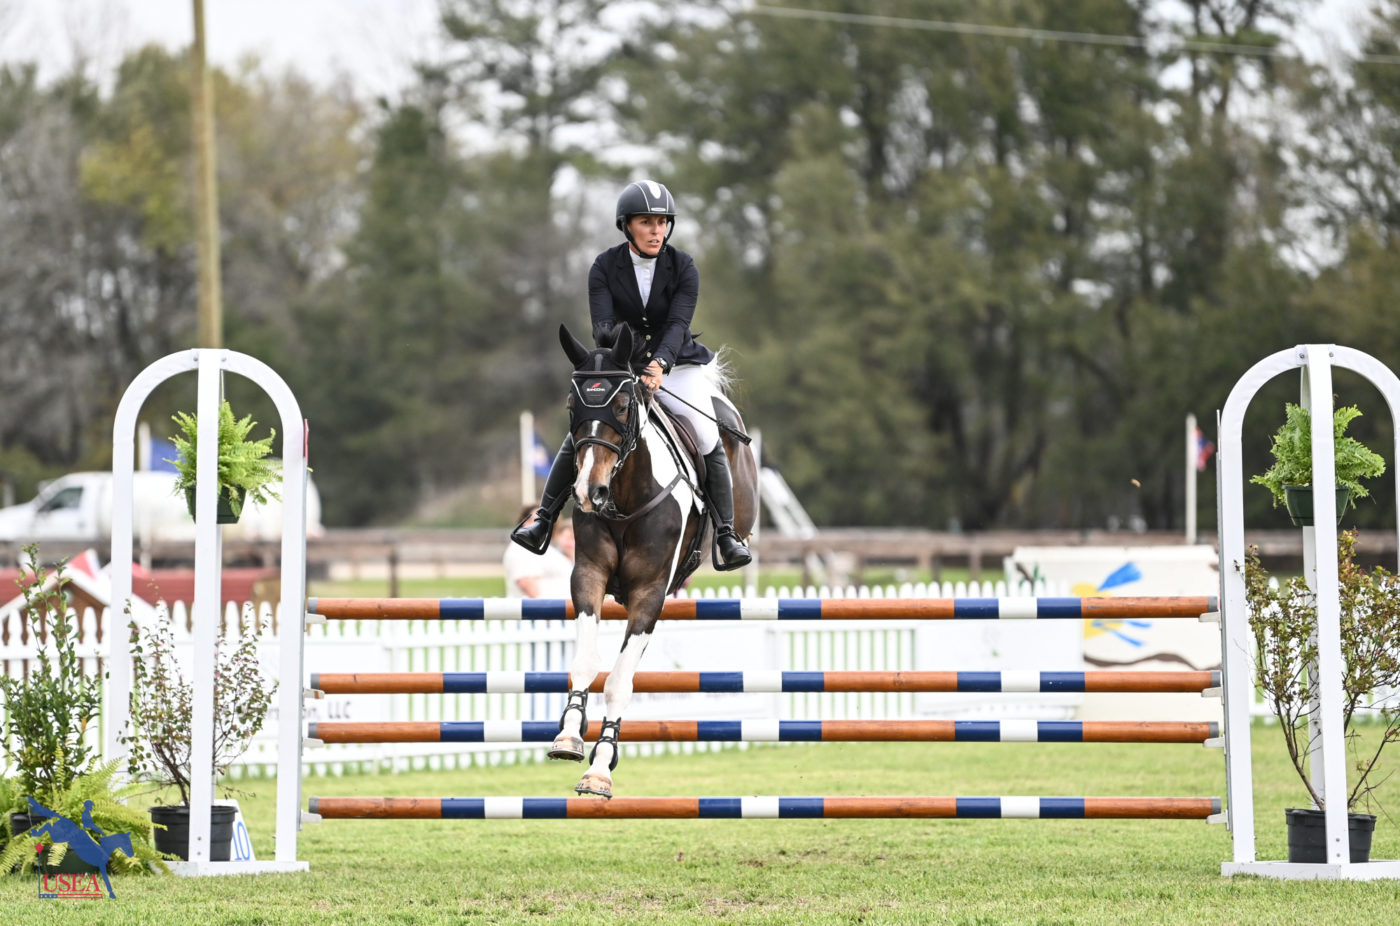 Dana Cooke and the colorful Harlequinn competed in the CCI3*-S. USEA/Lindsay Berreth photo